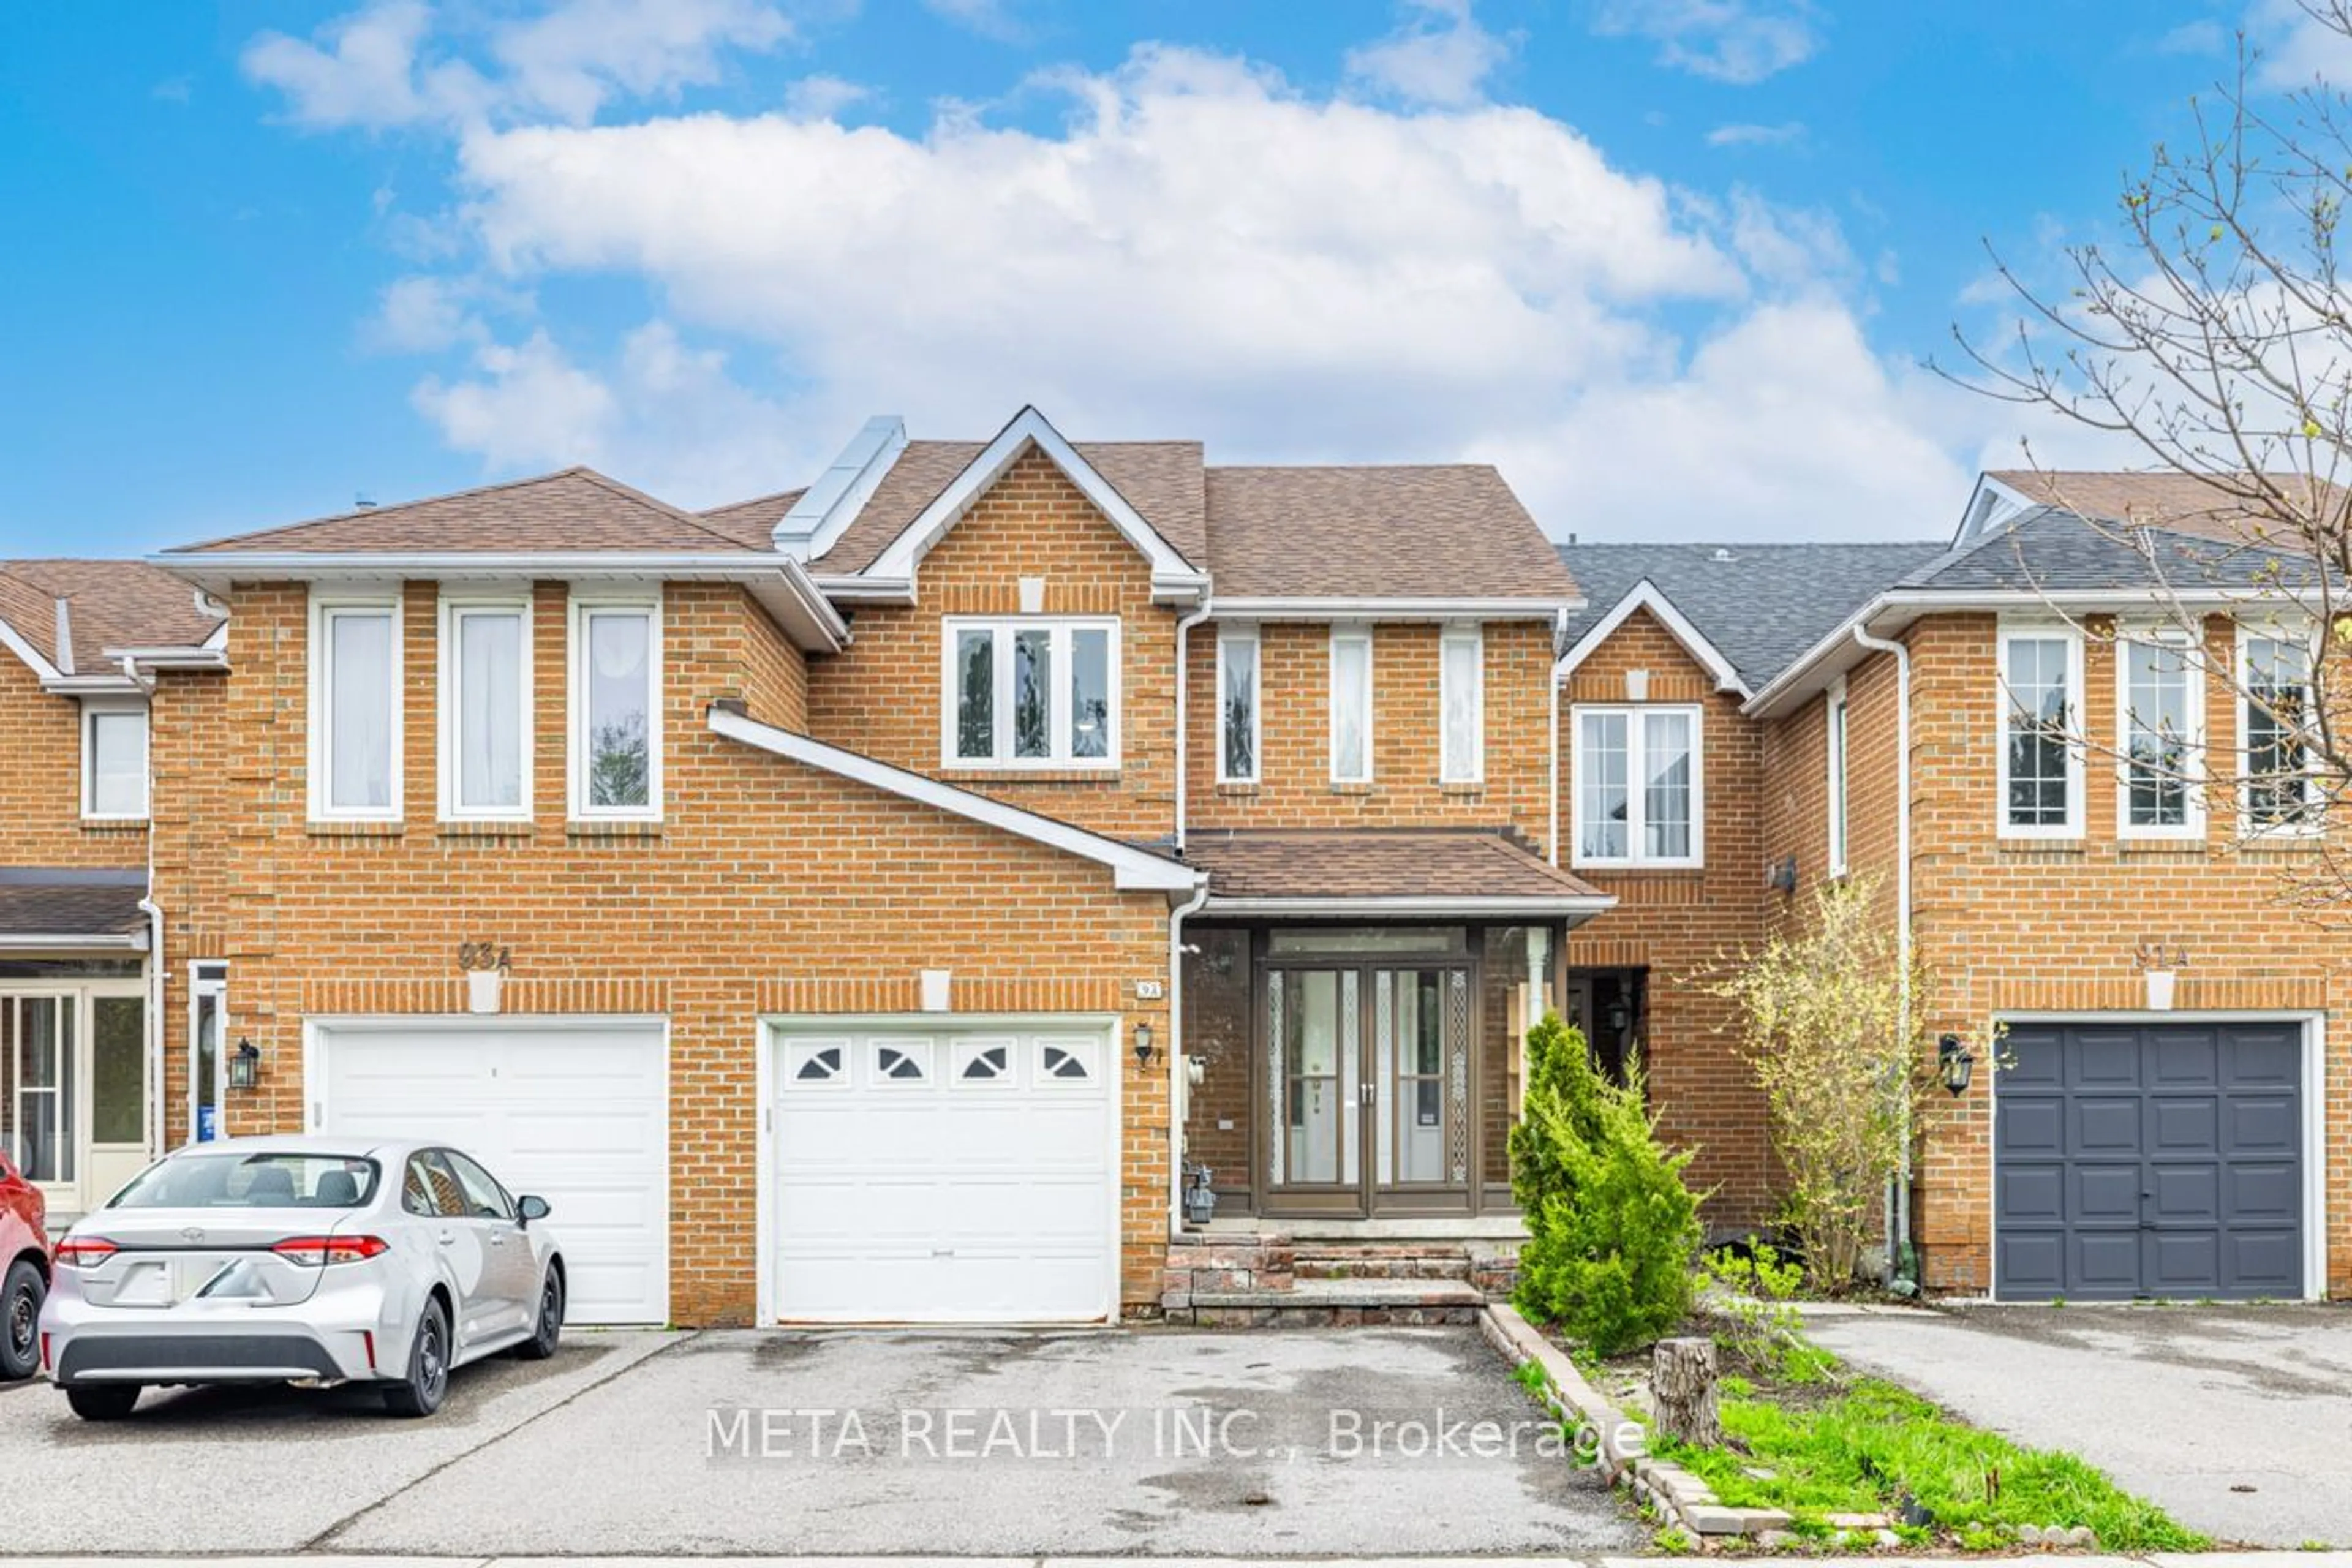 Home with brick exterior material for 93 Rose Branch Dr, Richmond Hill Ontario L4S 1J5